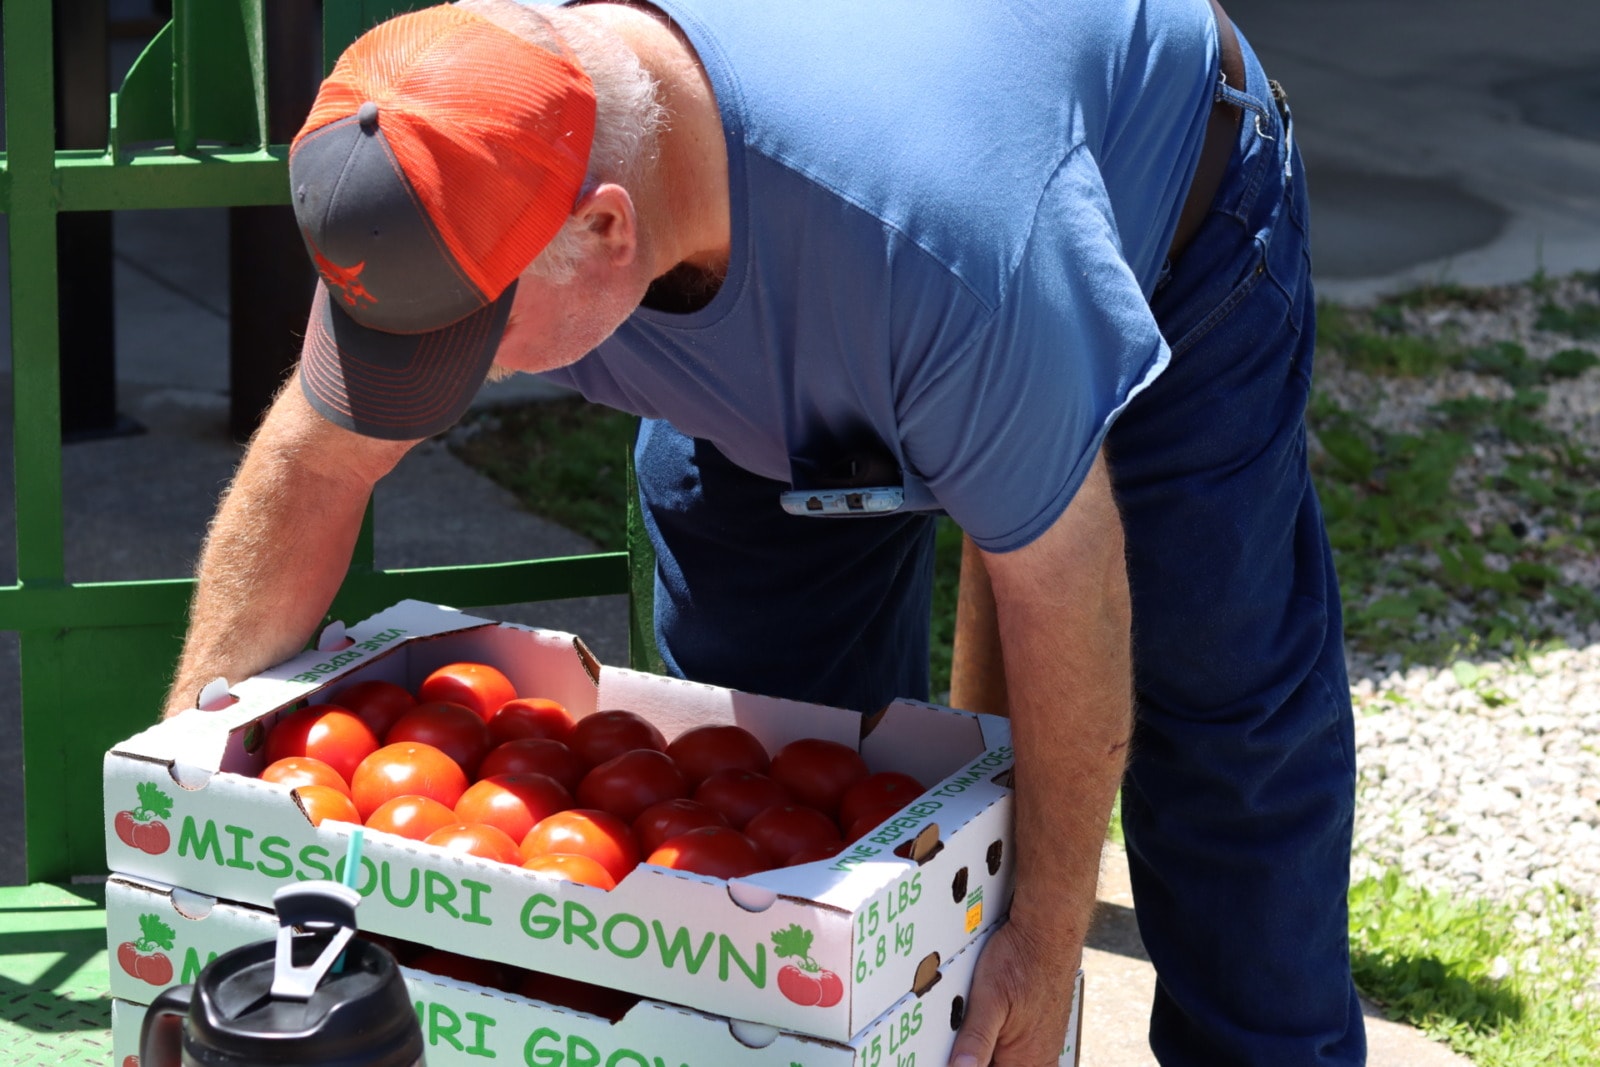 A man in a blue shirt and orange ball cap picks up three boxes of fat, red tomatoes. The boxes read "Missouri grown"